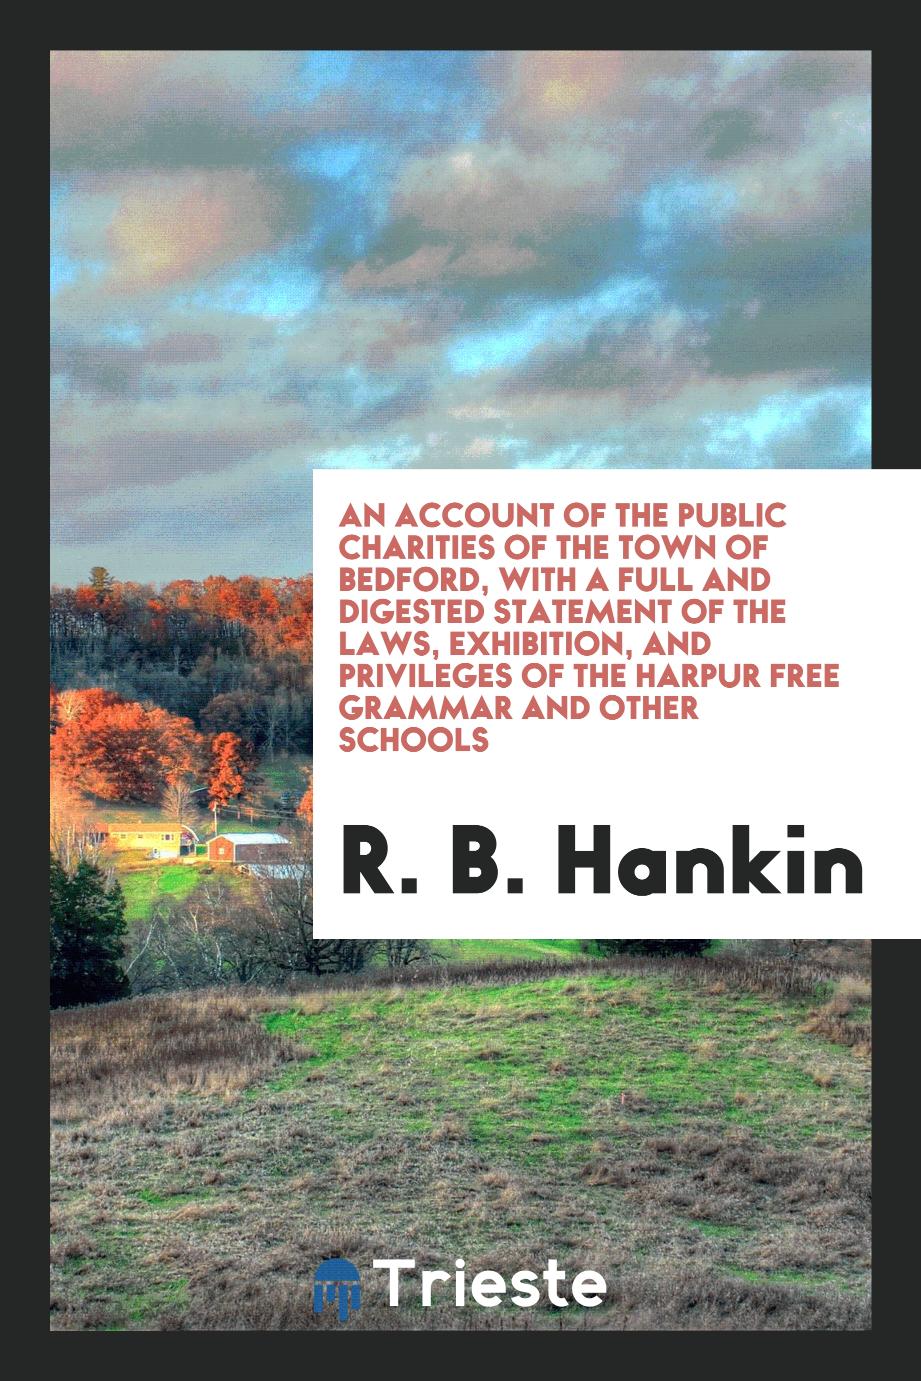 An Account of the Public Charities of the Town of Bedford, with a Full and Digested Statement of the Laws, Exhibition, and Privileges of the Harpur Free Grammar and Other Schools